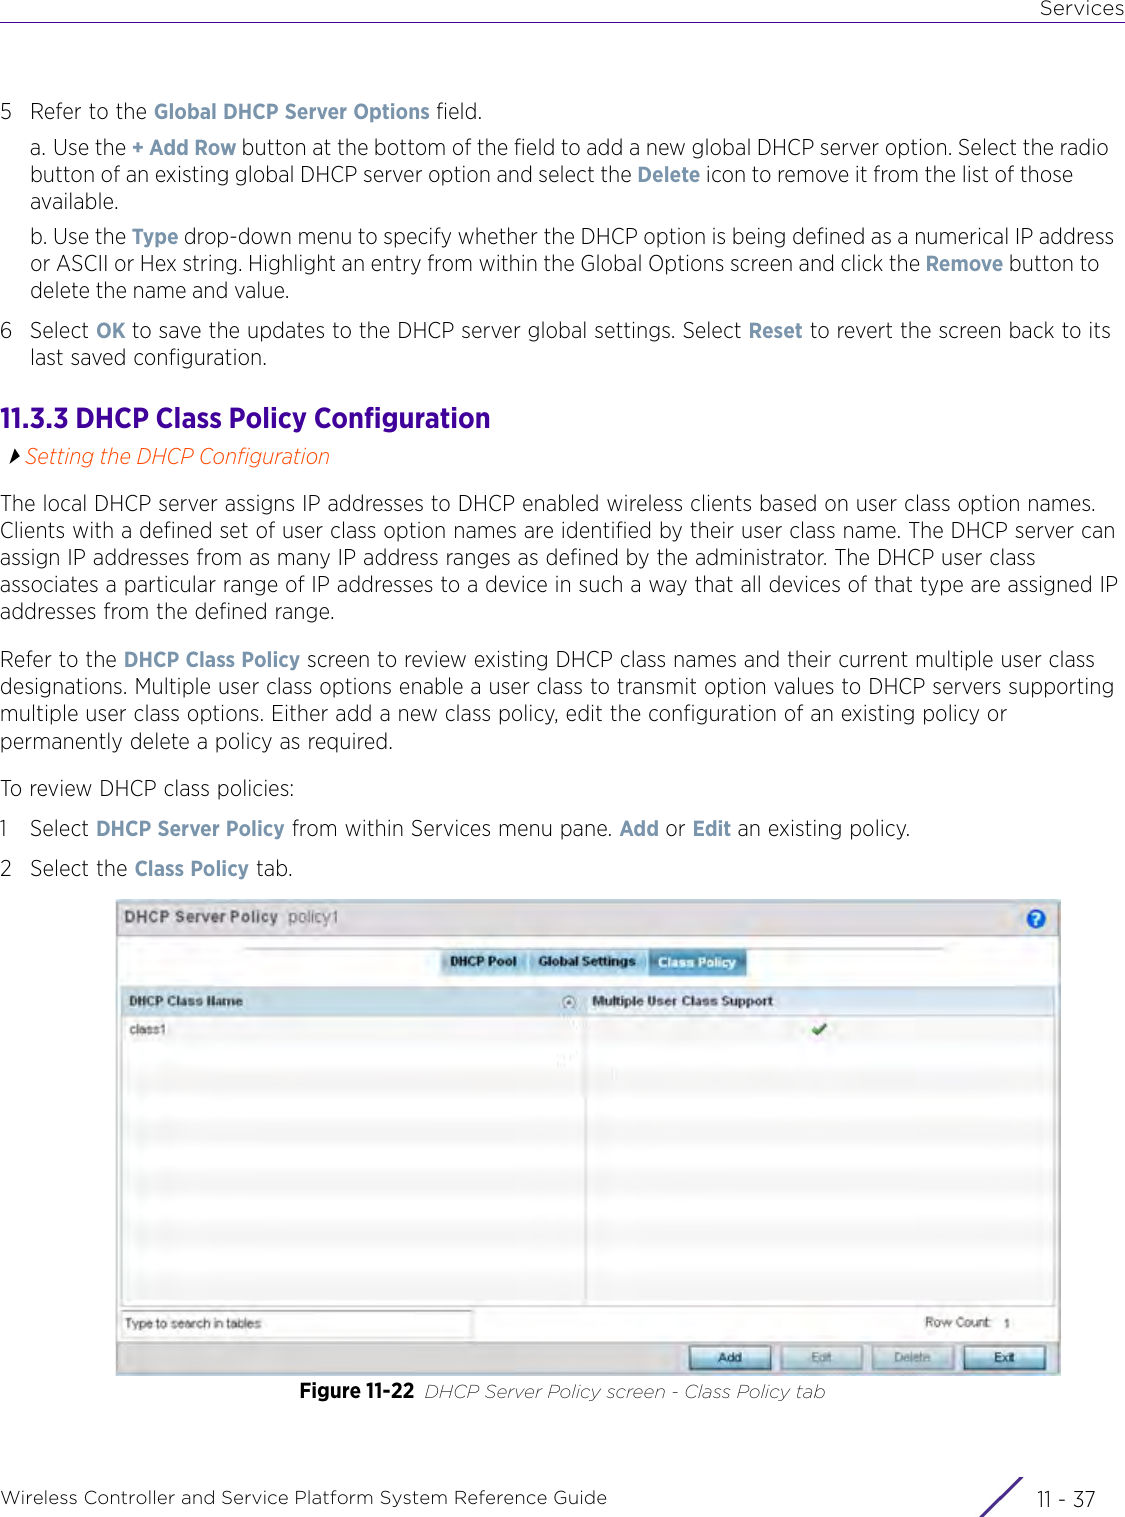 ServicesWireless Controller and Service Platform System Reference Guide 11 - 375 Refer to the Global DHCP Server Options field.a. Use the + Add Row button at the bottom of the field to add a new global DHCP server option. Select the radio button of an existing global DHCP server option and select the Delete icon to remove it from the list of those available.b. Use the Type drop-down menu to specify whether the DHCP option is being defined as a numerical IP address or ASCII or Hex string. Highlight an entry from within the Global Options screen and click the Remove button to delete the name and value.6Select OK to save the updates to the DHCP server global settings. Select Reset to revert the screen back to its last saved configuration.11.3.3 DHCP Class Policy ConfigurationSetting the DHCP ConfigurationThe local DHCP server assigns IP addresses to DHCP enabled wireless clients based on user class option names. Clients with a defined set of user class option names are identified by their user class name. The DHCP server can assign IP addresses from as many IP address ranges as defined by the administrator. The DHCP user class associates a particular range of IP addresses to a device in such a way that all devices of that type are assigned IP addresses from the defined range. Refer to the DHCP Class Policy screen to review existing DHCP class names and their current multiple user class designations. Multiple user class options enable a user class to transmit option values to DHCP servers supporting multiple user class options. Either add a new class policy, edit the configuration of an existing policy or permanently delete a policy as required.To review DHCP class policies:1Select DHCP Server Policy from within Services menu pane. Add or Edit an existing policy.2 Select the Class Policy tab.Figure 11-22 DHCP Server Policy screen - Class Policy tab